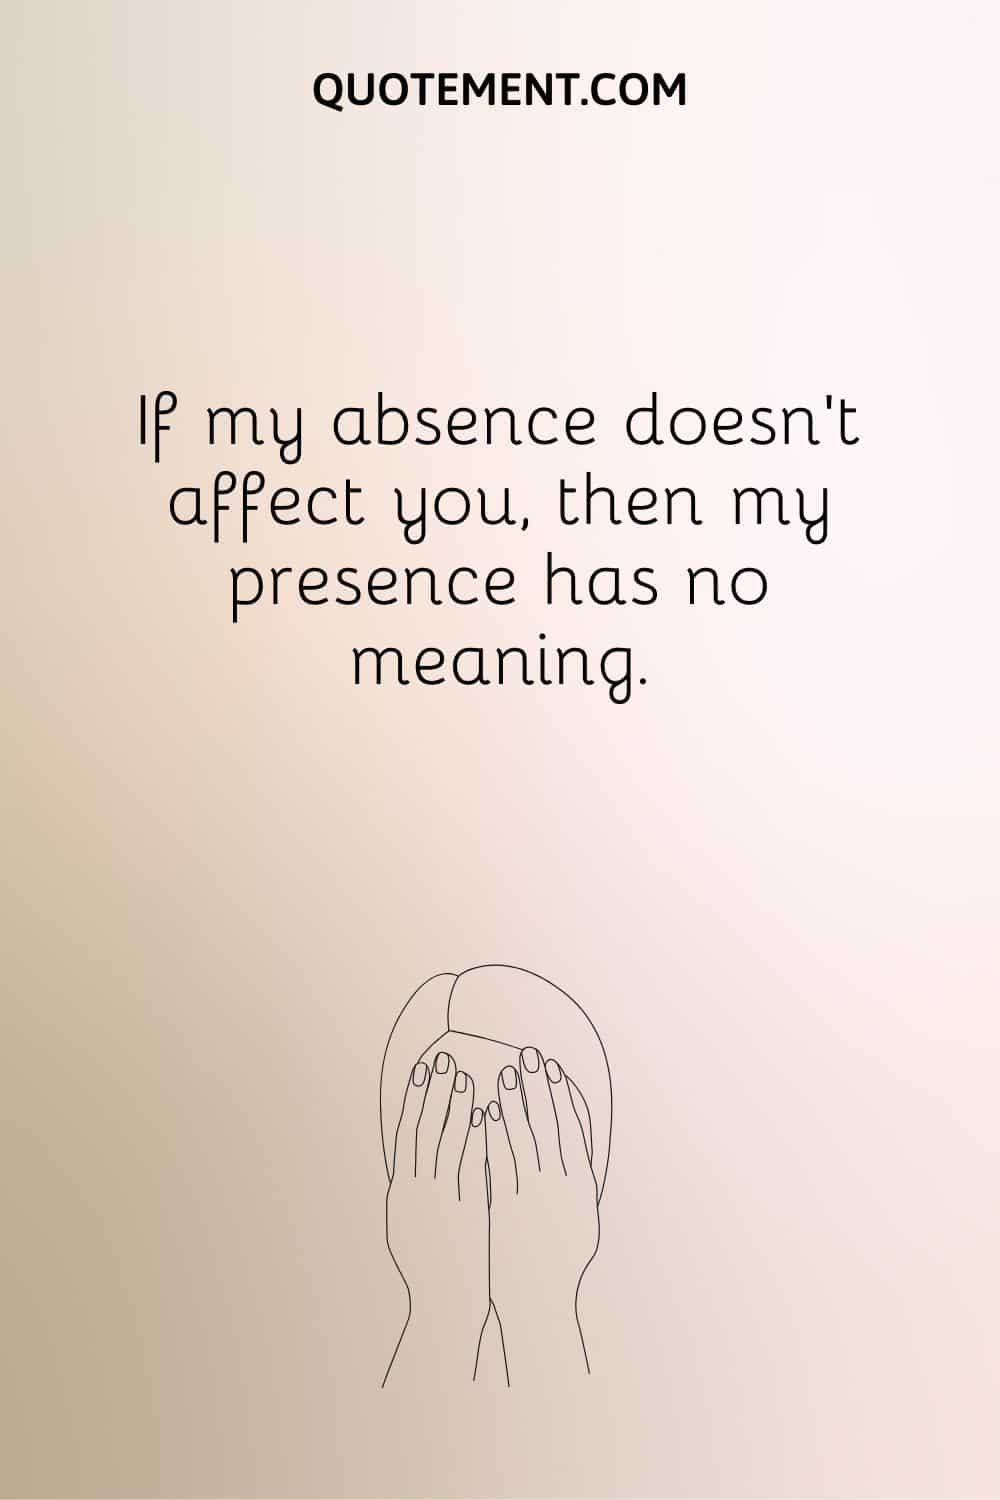 If my absence doesn’t affect you, then my presence has no meaning.
